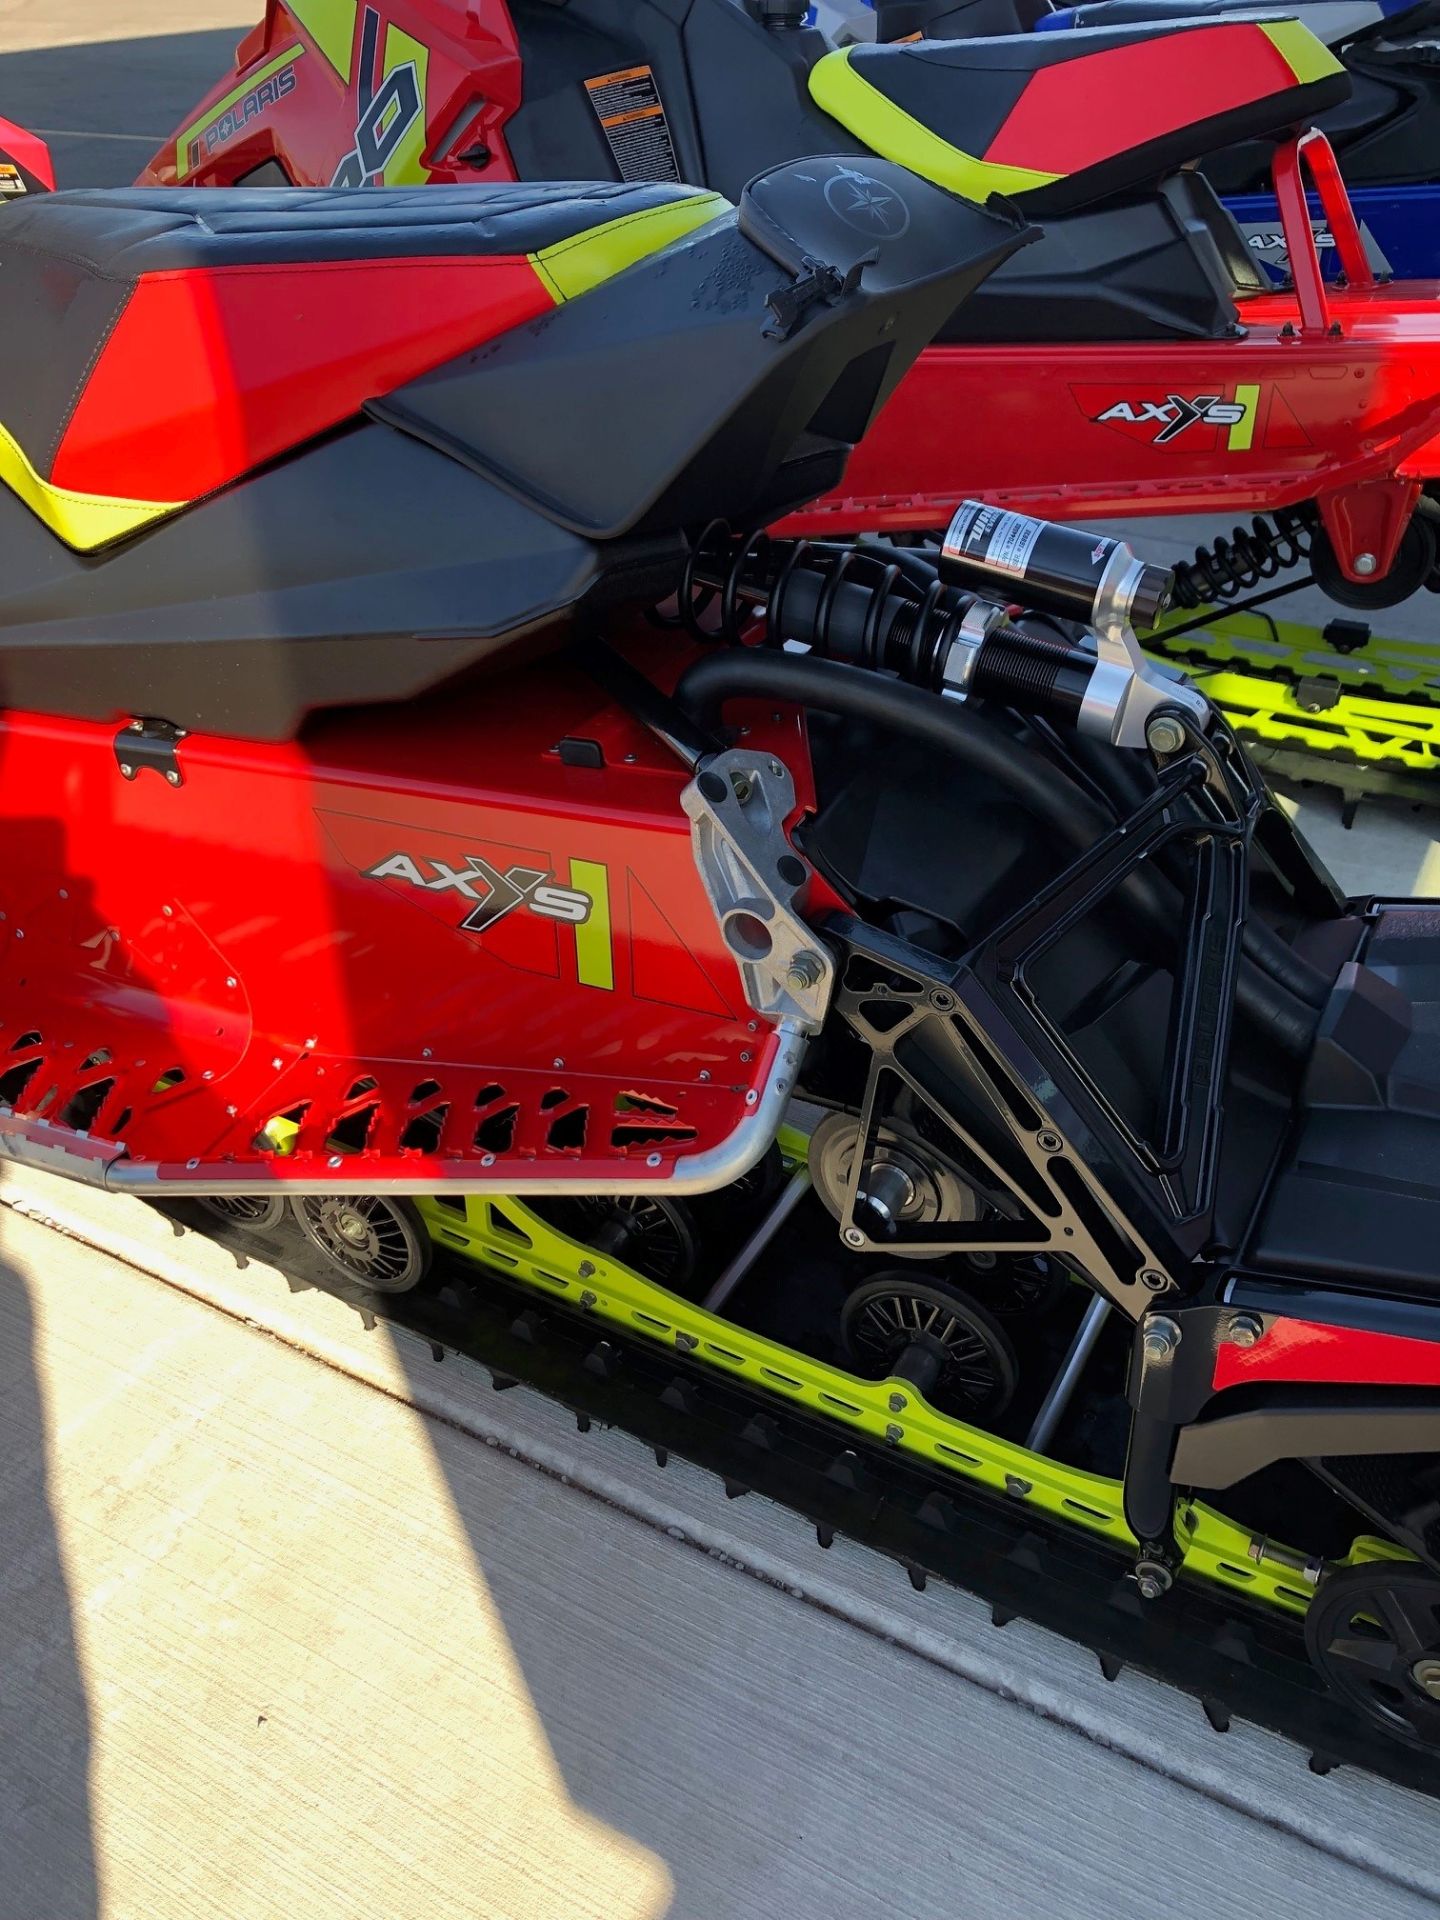 2021 Polaris 850 Switchback PRO-S Factory Choice in Suamico, Wisconsin - Photo 6